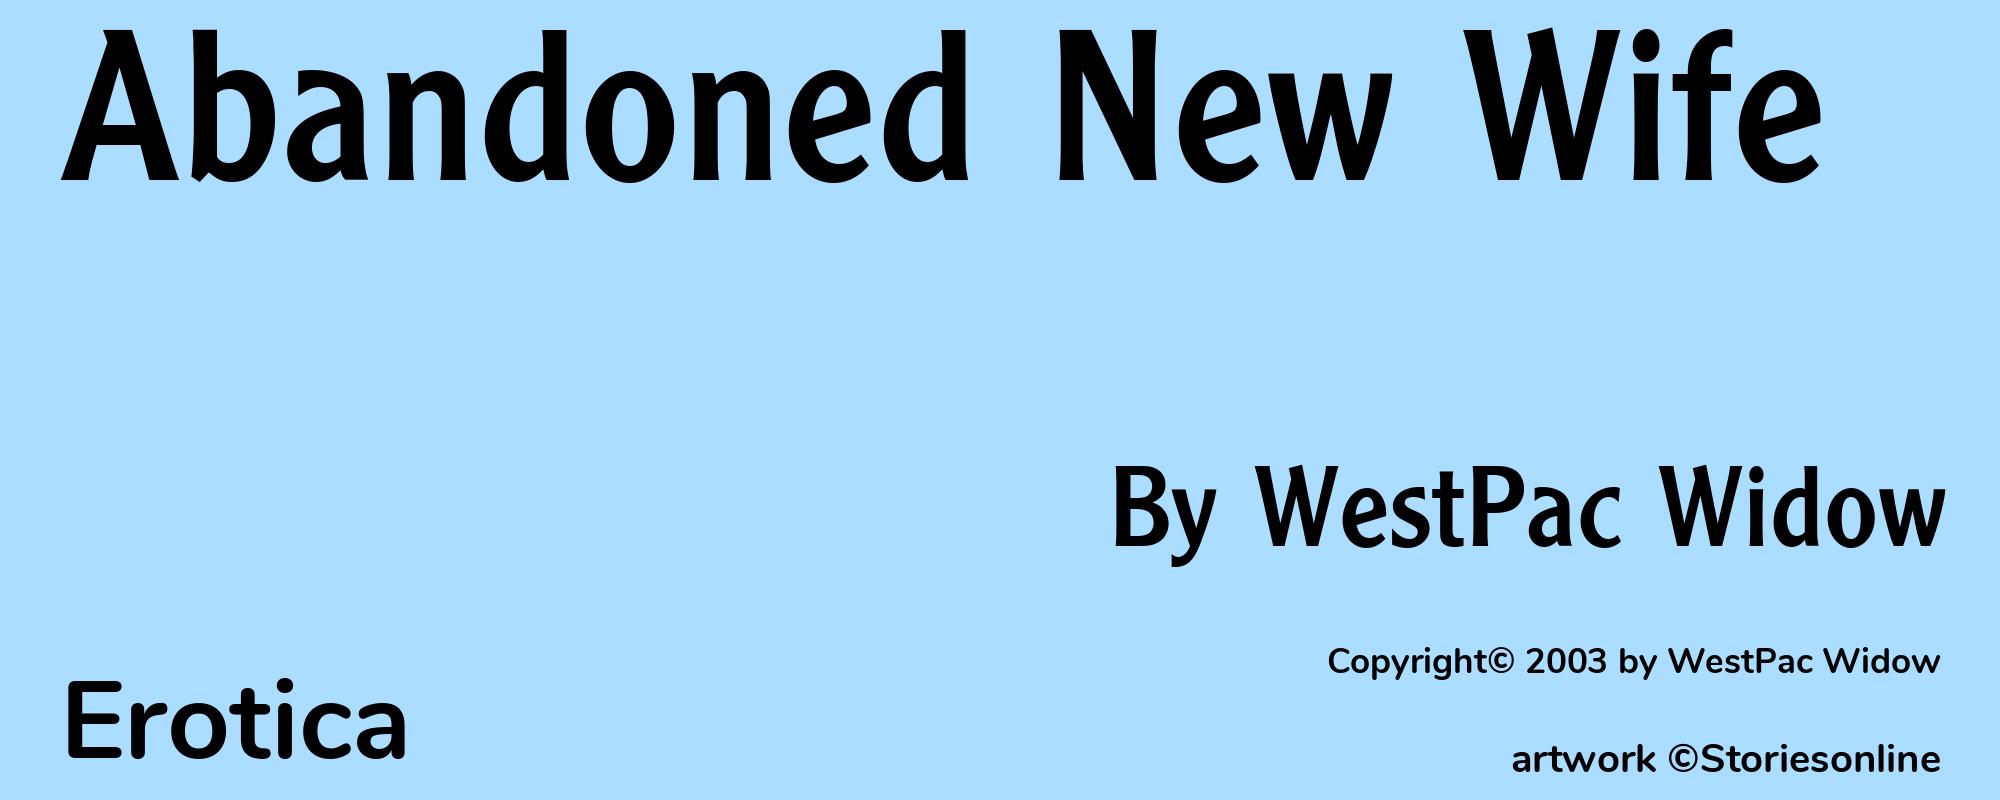 Abandoned New Wife - Cover